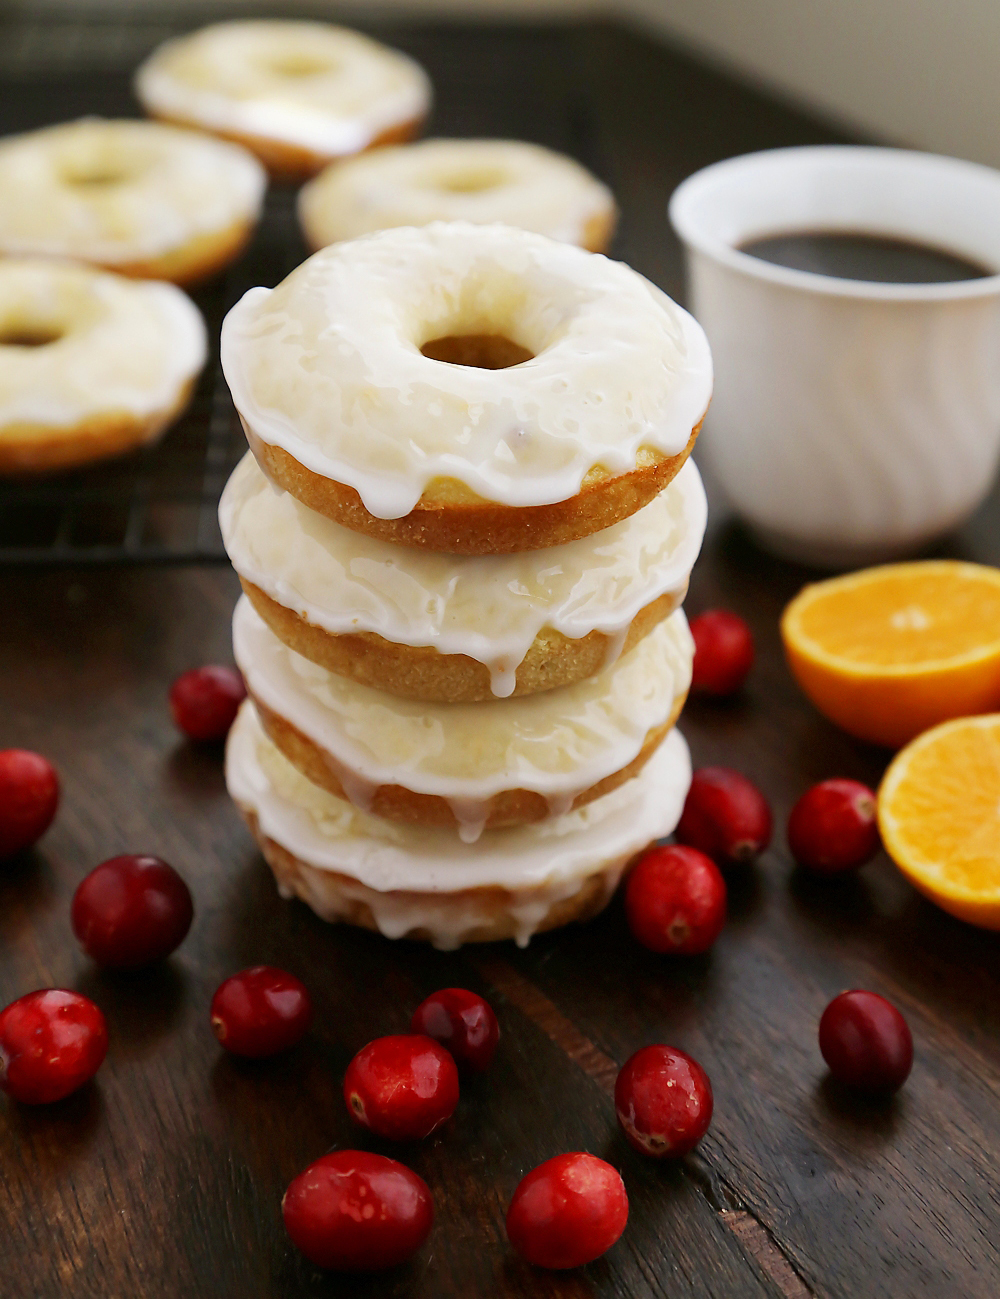 Glazed Cranberry Orange Donuts - Super soft, tangy-sweet donuts with fresh cranberries and orange zest! thecomfortofcooking.com